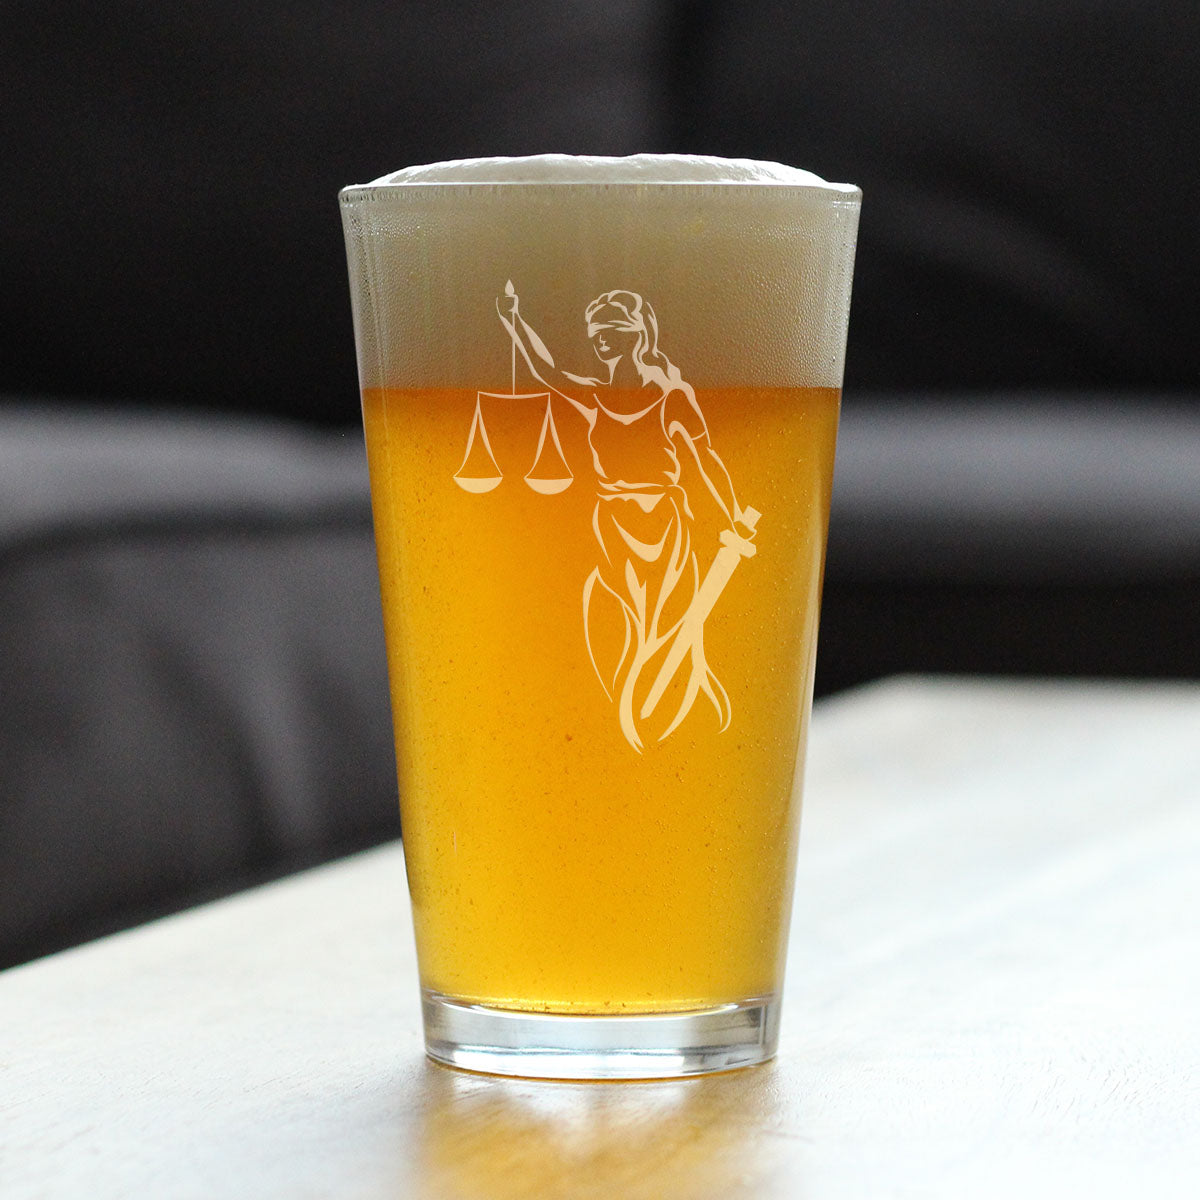 Lady Justice - Pint Glass for Beer - Lawyers and Attorneys Themed Gifts or Party Decor for Women and Men - 16 oz Glasses